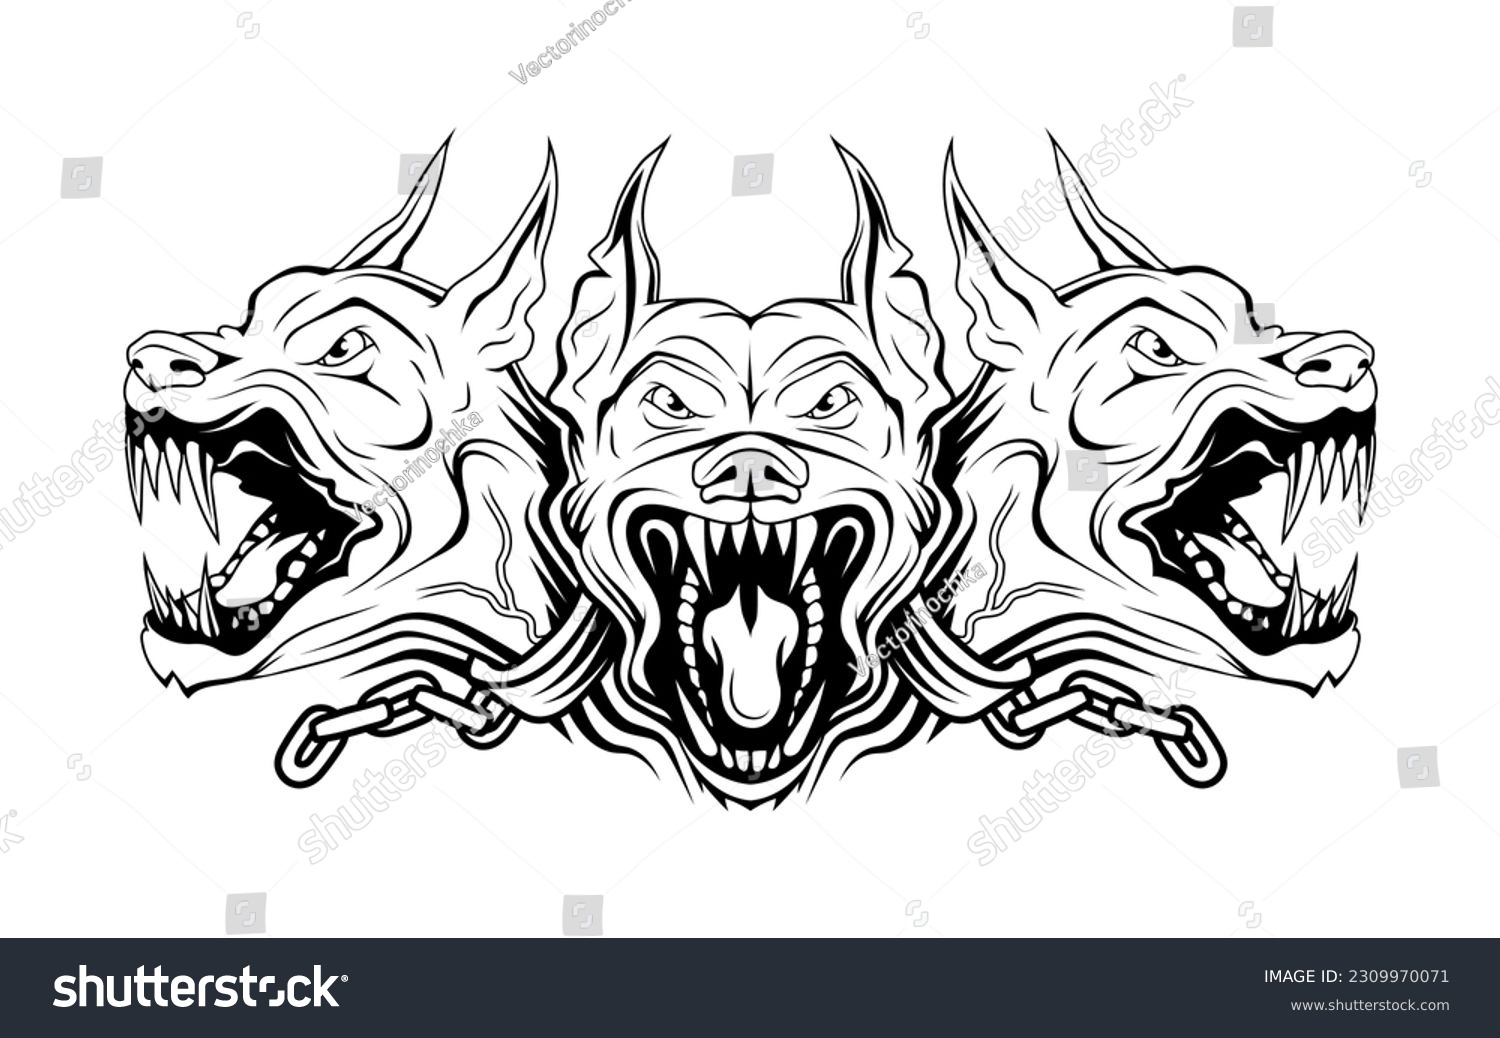 SVG of Cerberus. Vector illustration of a sketch multi-headed dog, guarding the gates of the underworld of shadows, preventing the souls of the dead from leaving it. Greco-Roman mythology svg